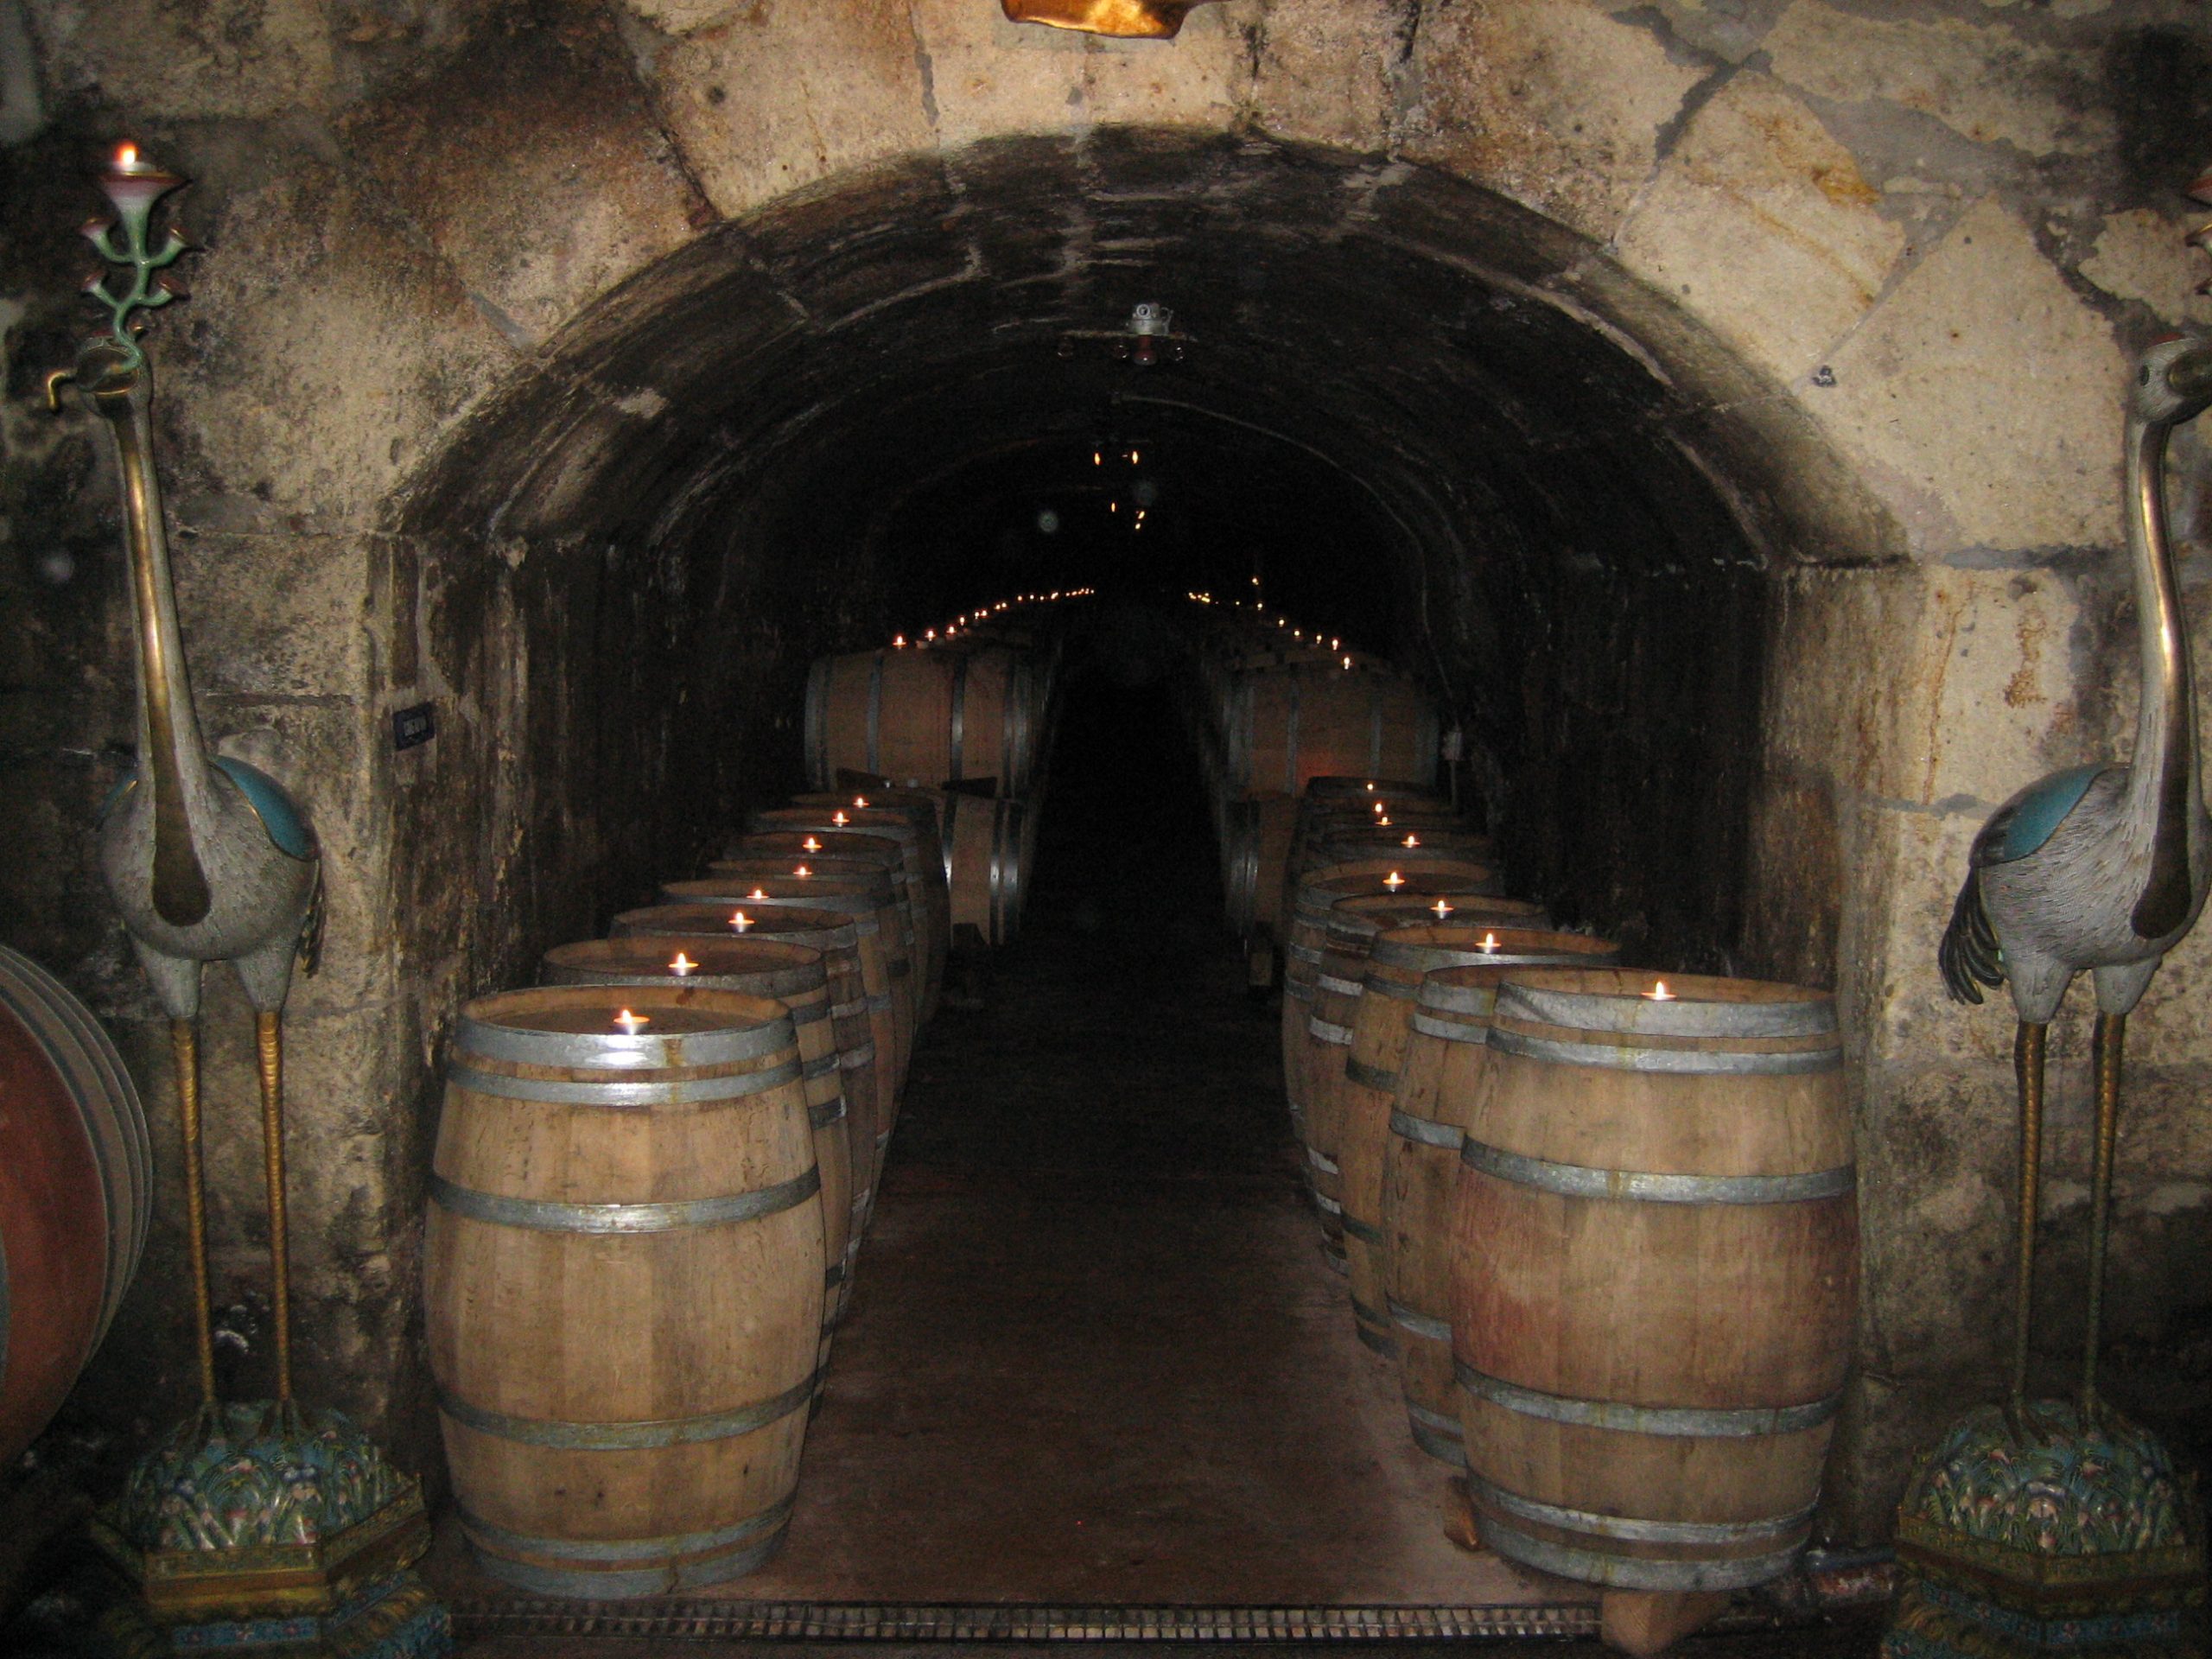 a number of stacked barrels in an underground brick tunnel